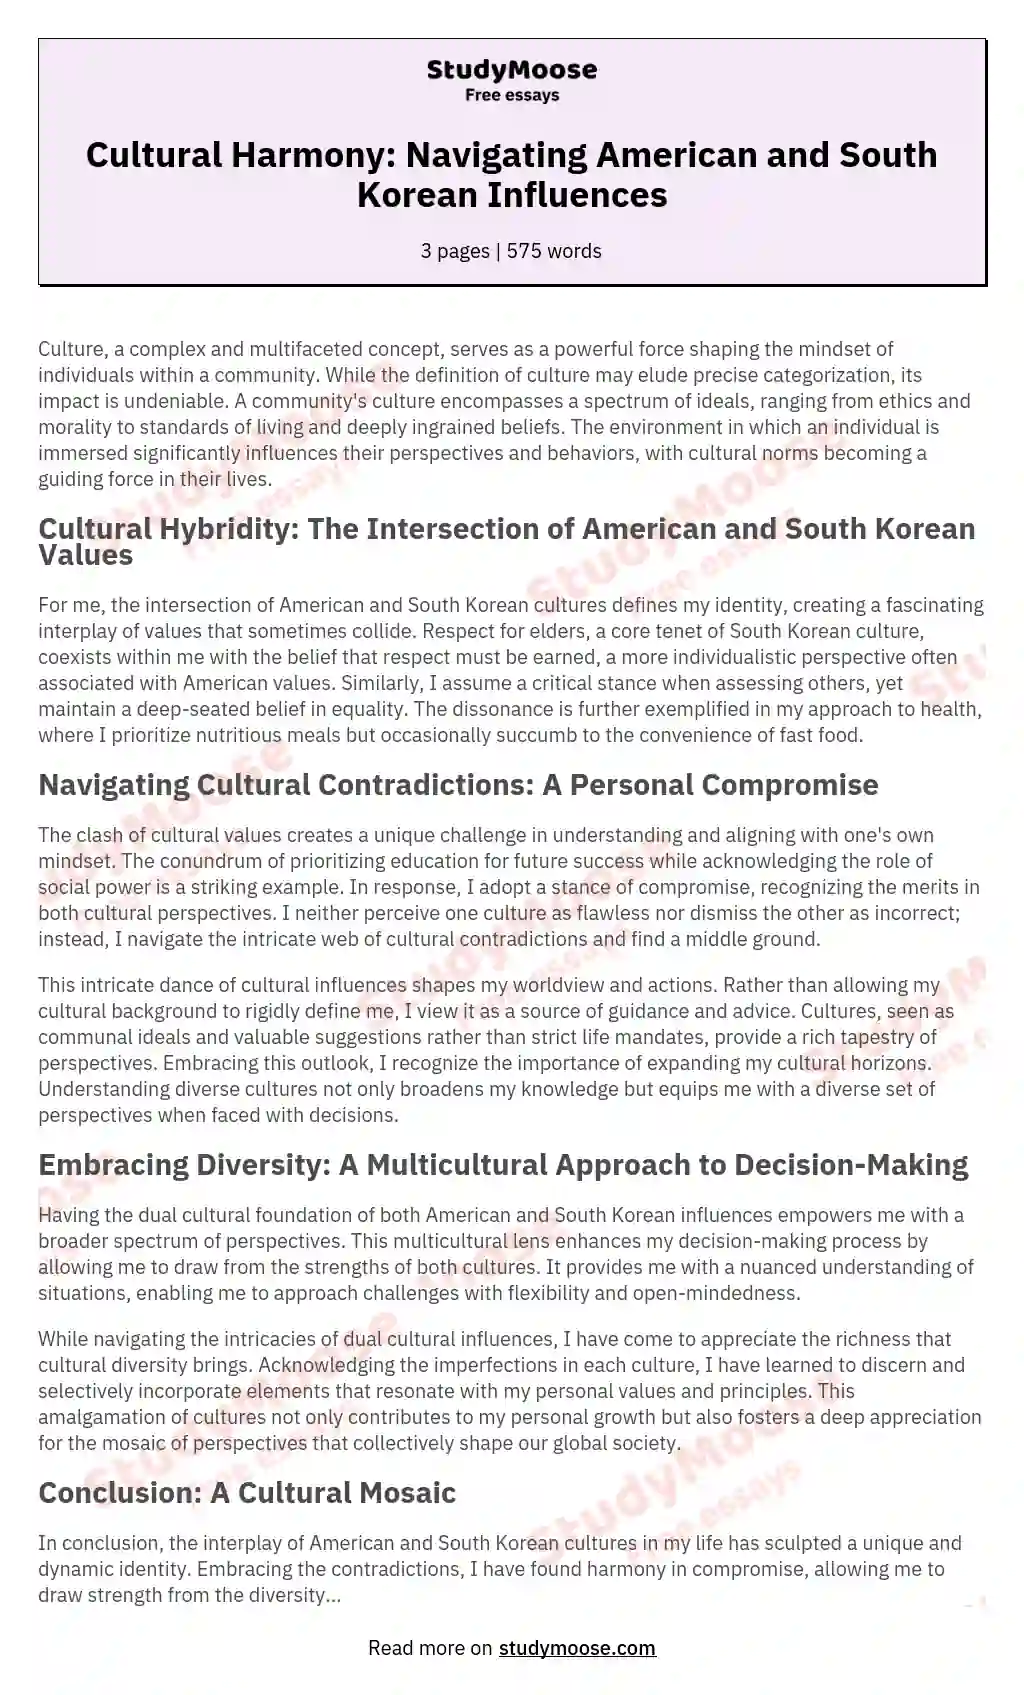 Cultural Harmony: Navigating American and South Korean Influences essay